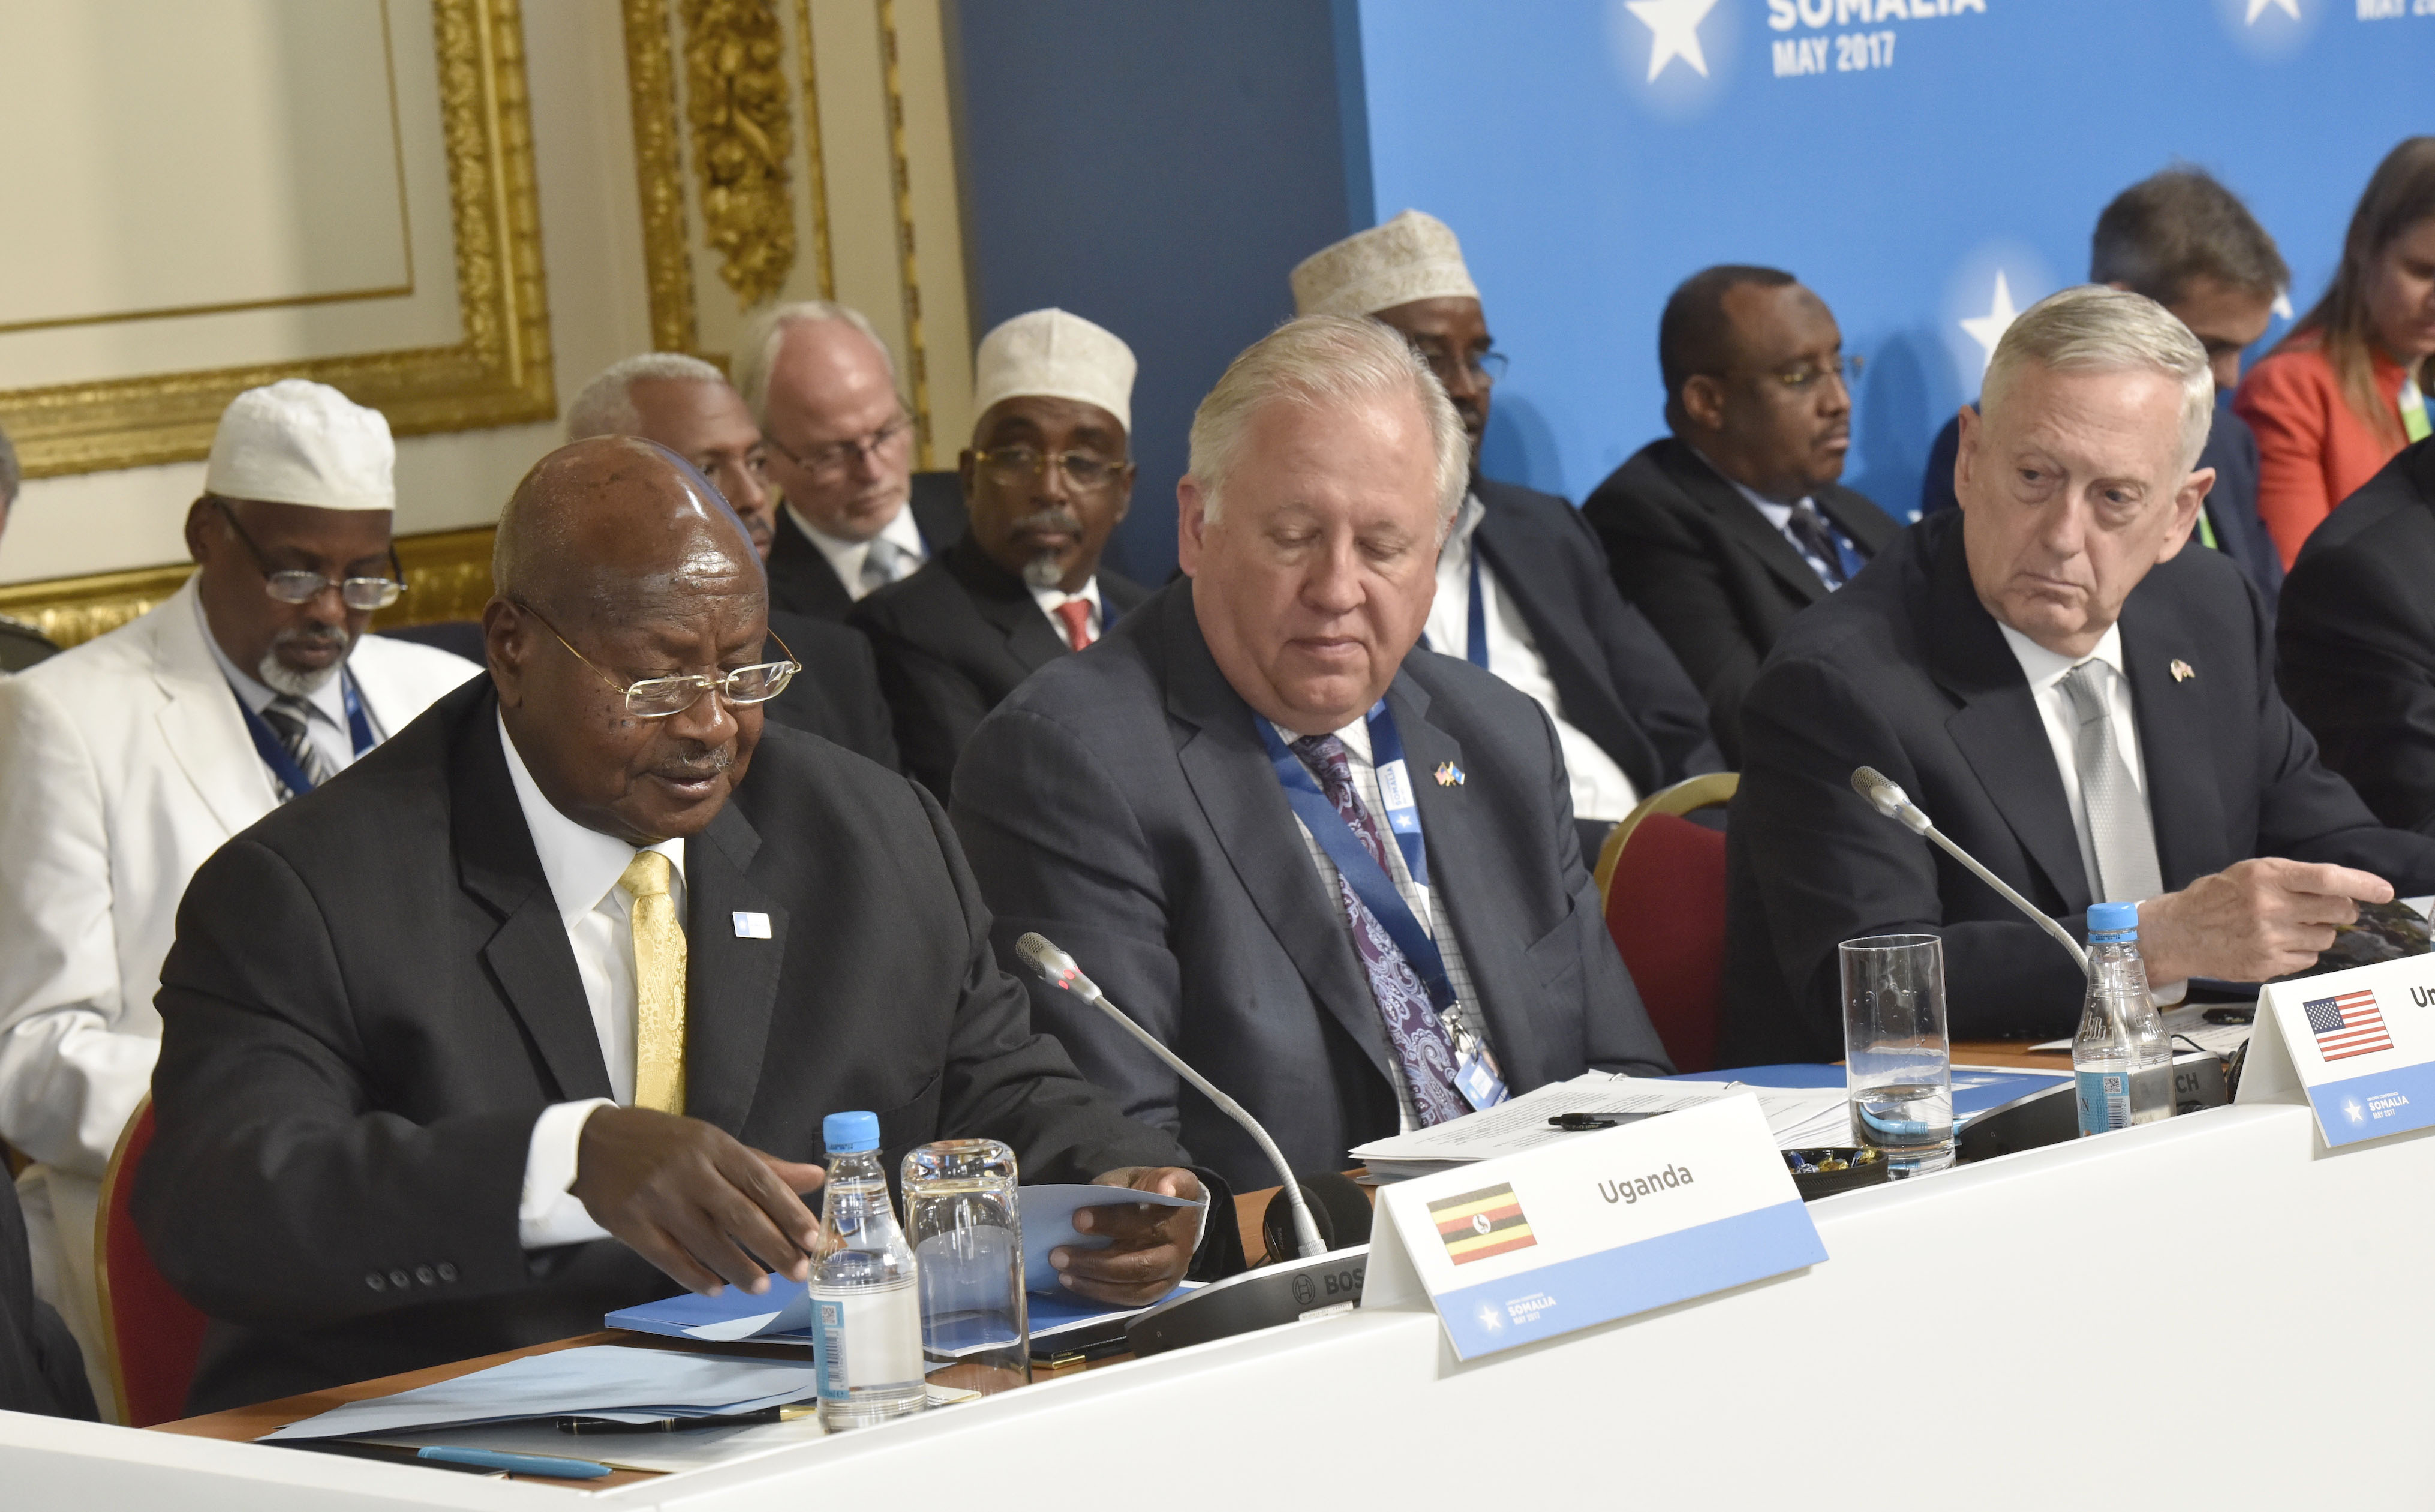 FULL SPEECH: What Museveni said at Somalia Conference in London   